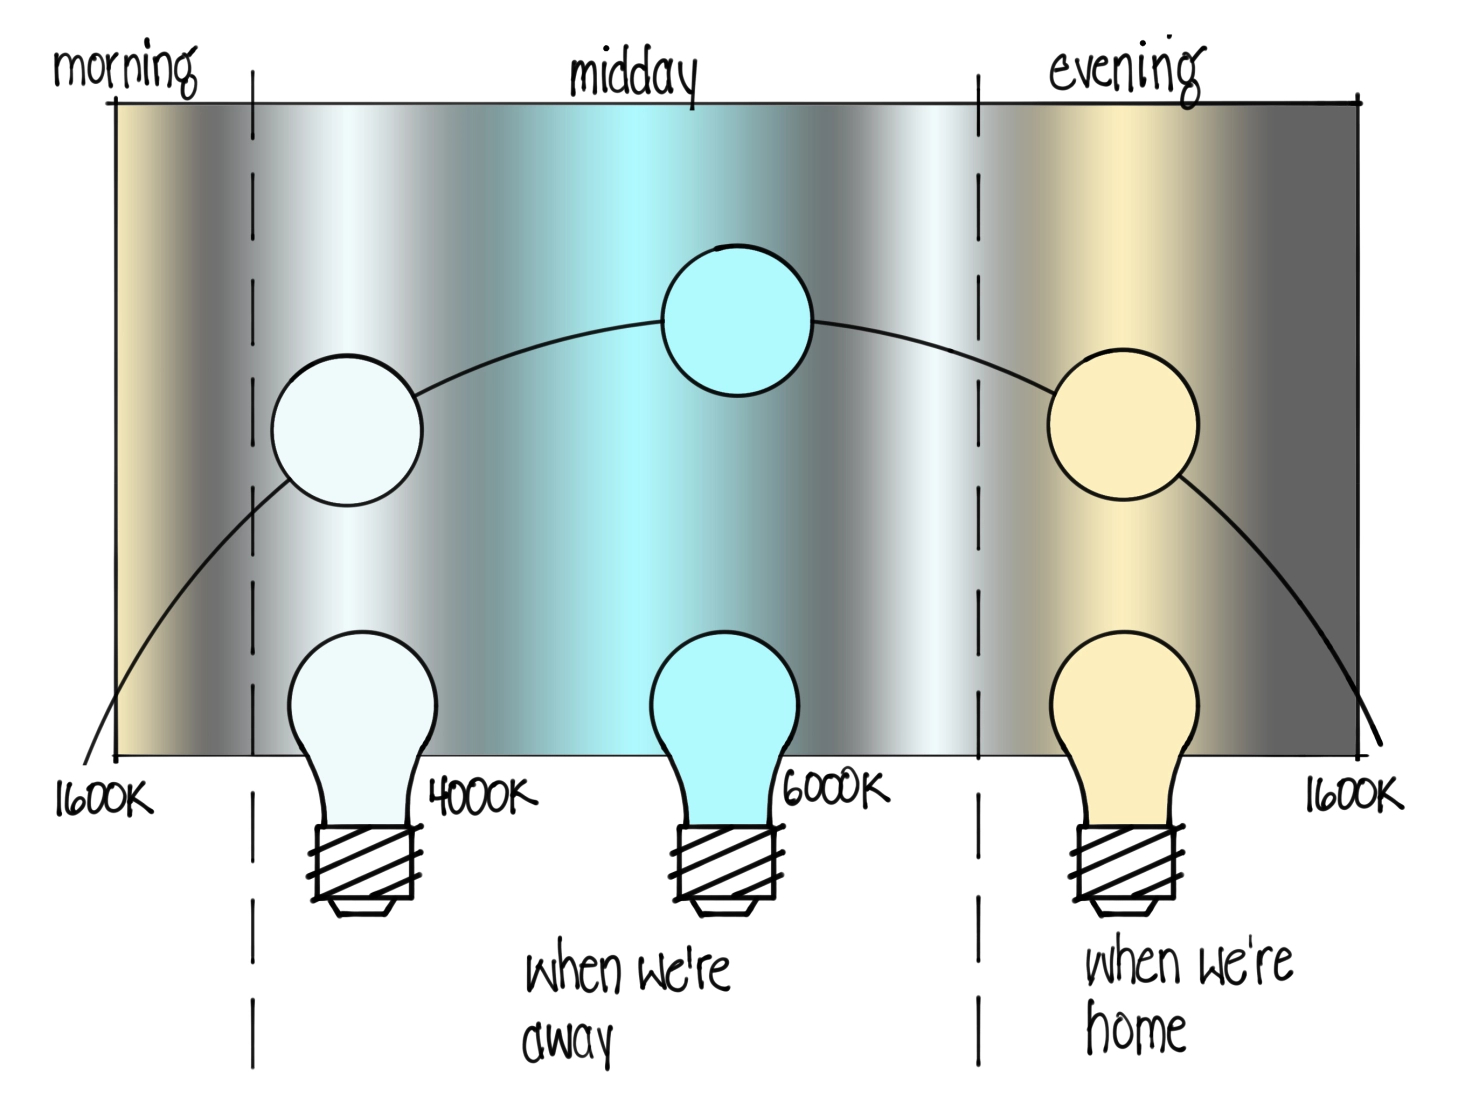 A diagram of different light temperatures to use at different times of the day - warm and morning and night, cool during the day